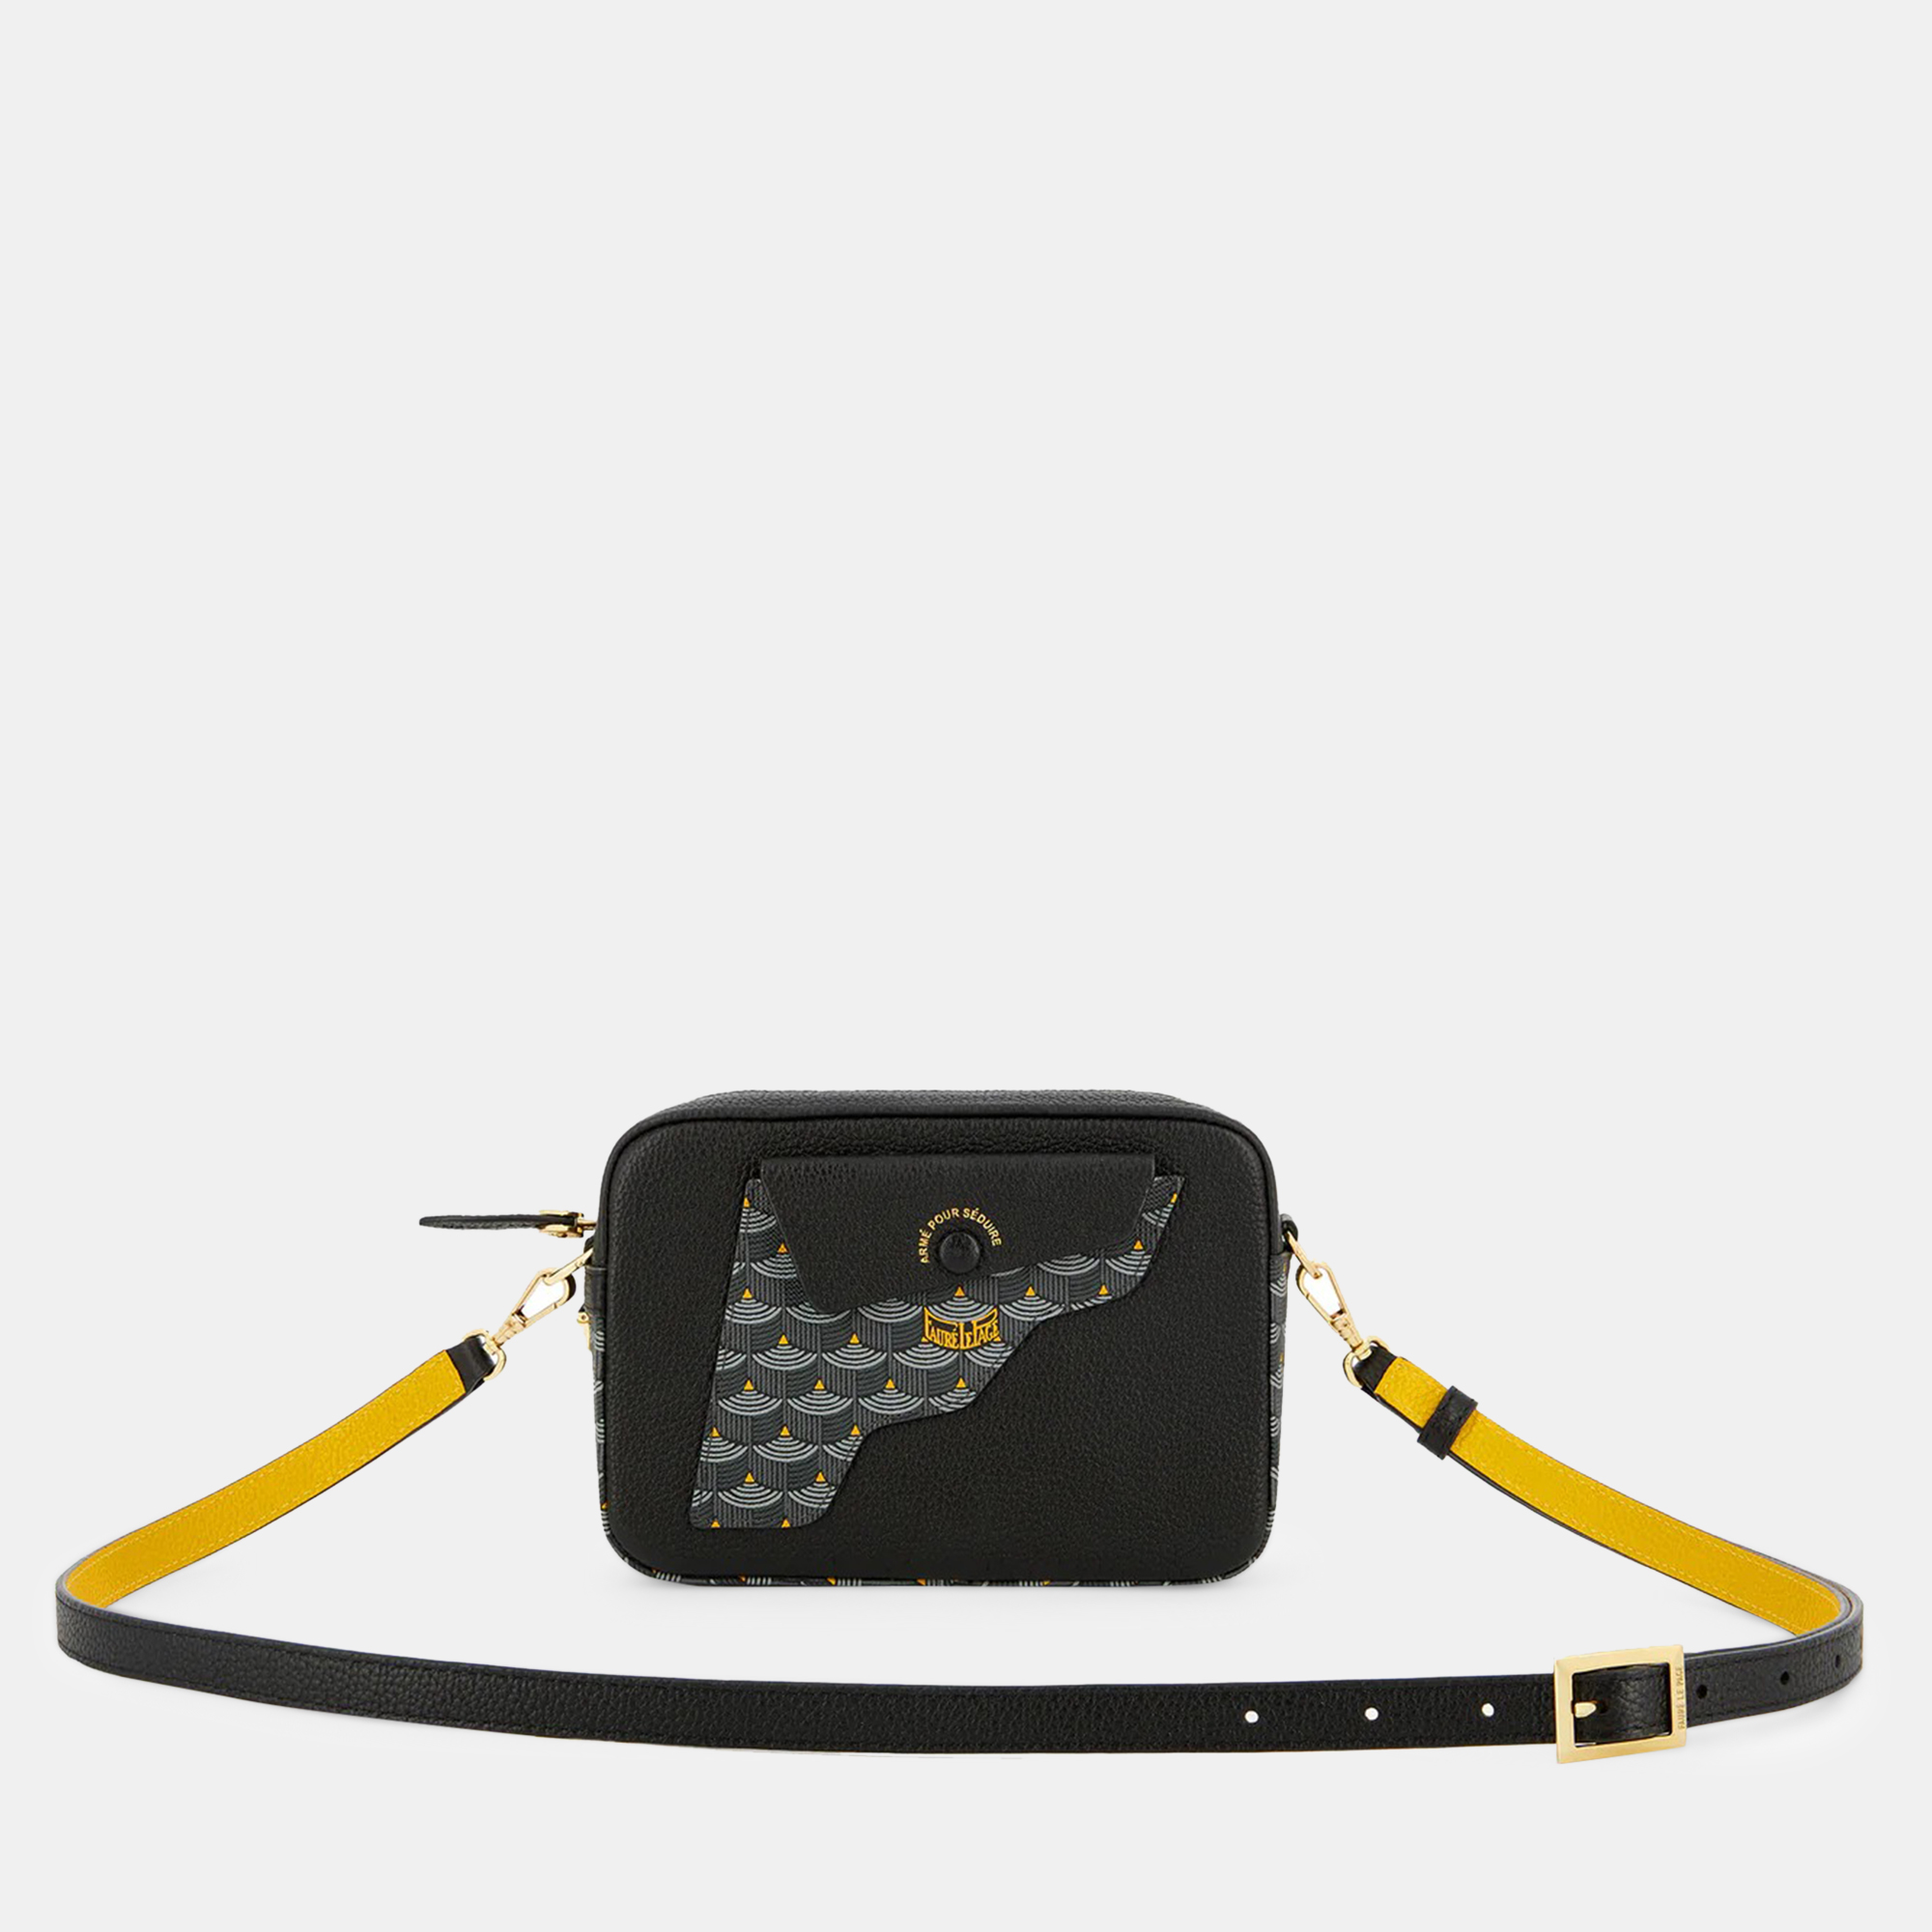 Faure Le Page Black Leather Cross Body